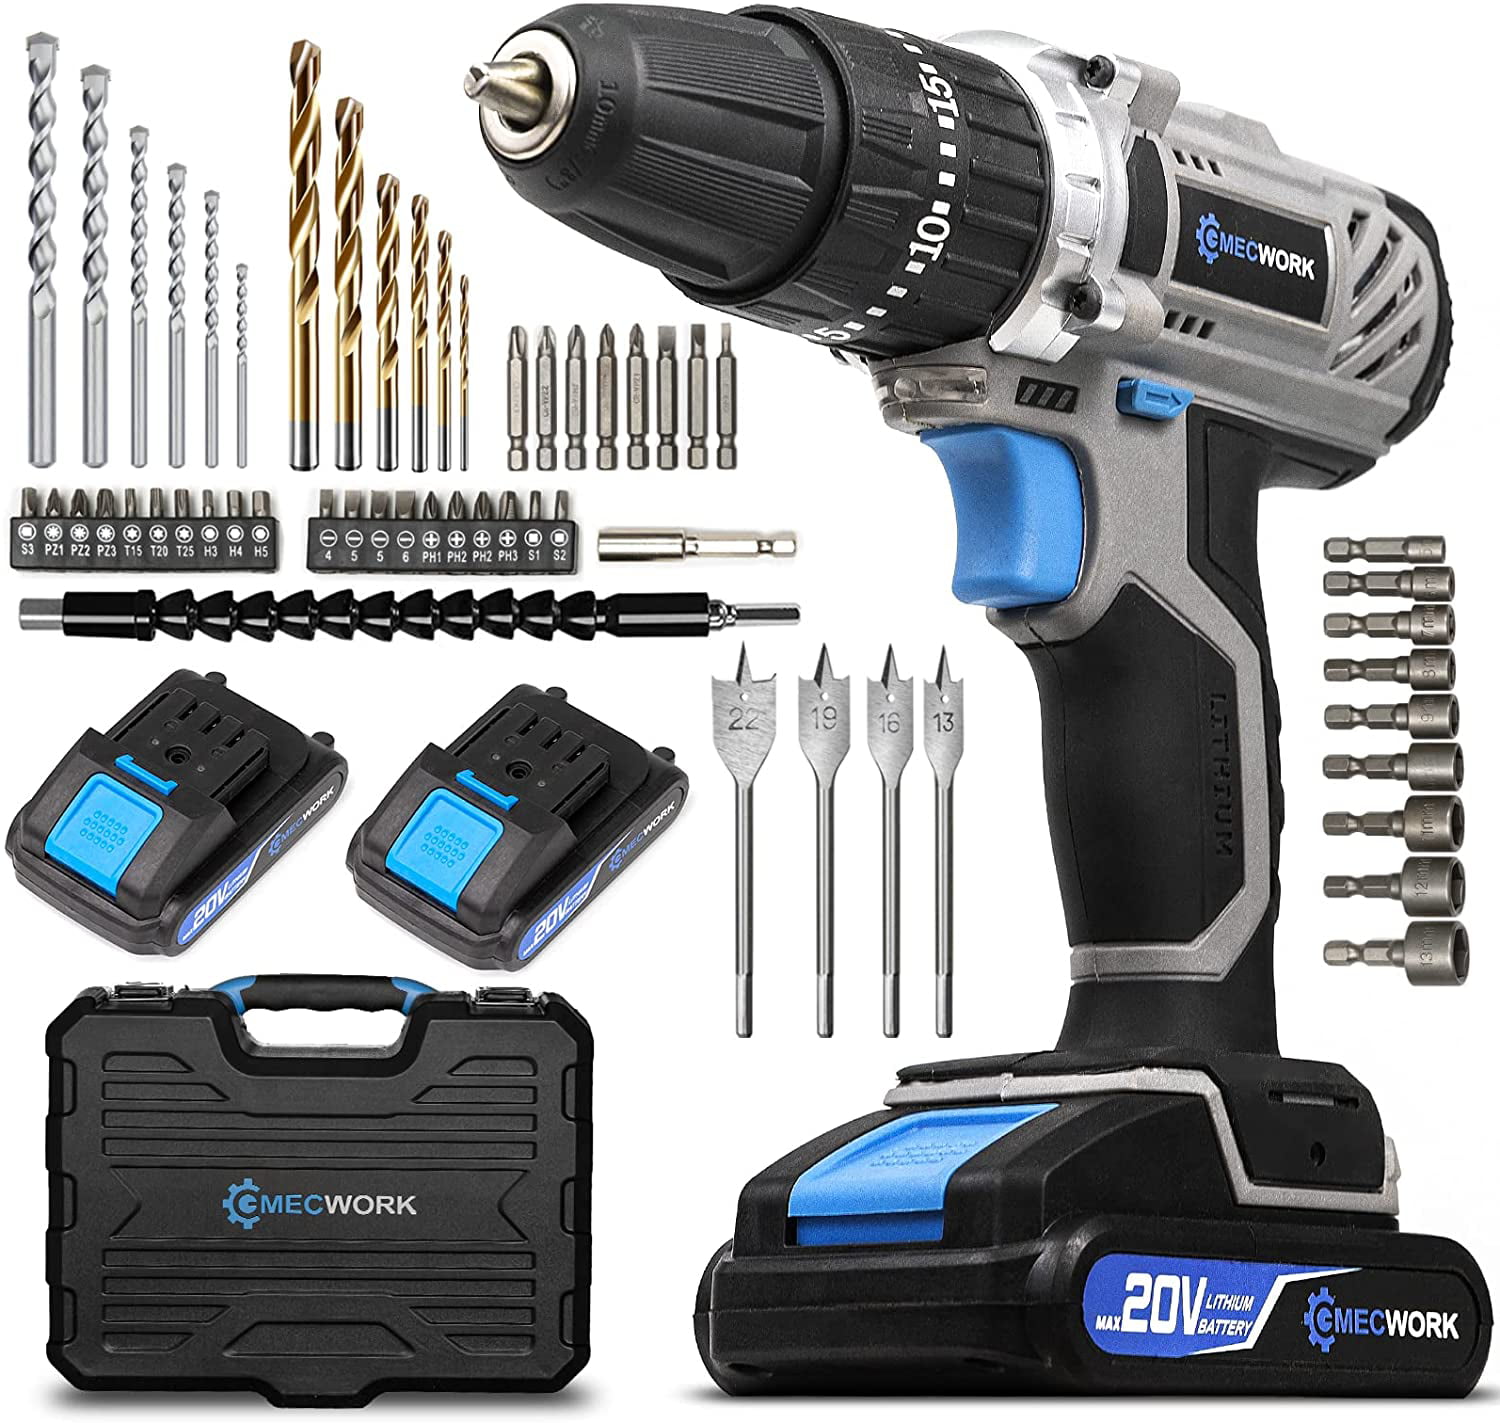 MecWork Cordless Power Drill Tool Set, Impact Driver with Two 20-Volt Batteries and Quick Charger, Keyless Chuck, 280 In-lb Torque, 21+1+1 Clutch, 55 PC. Bit Set Included -